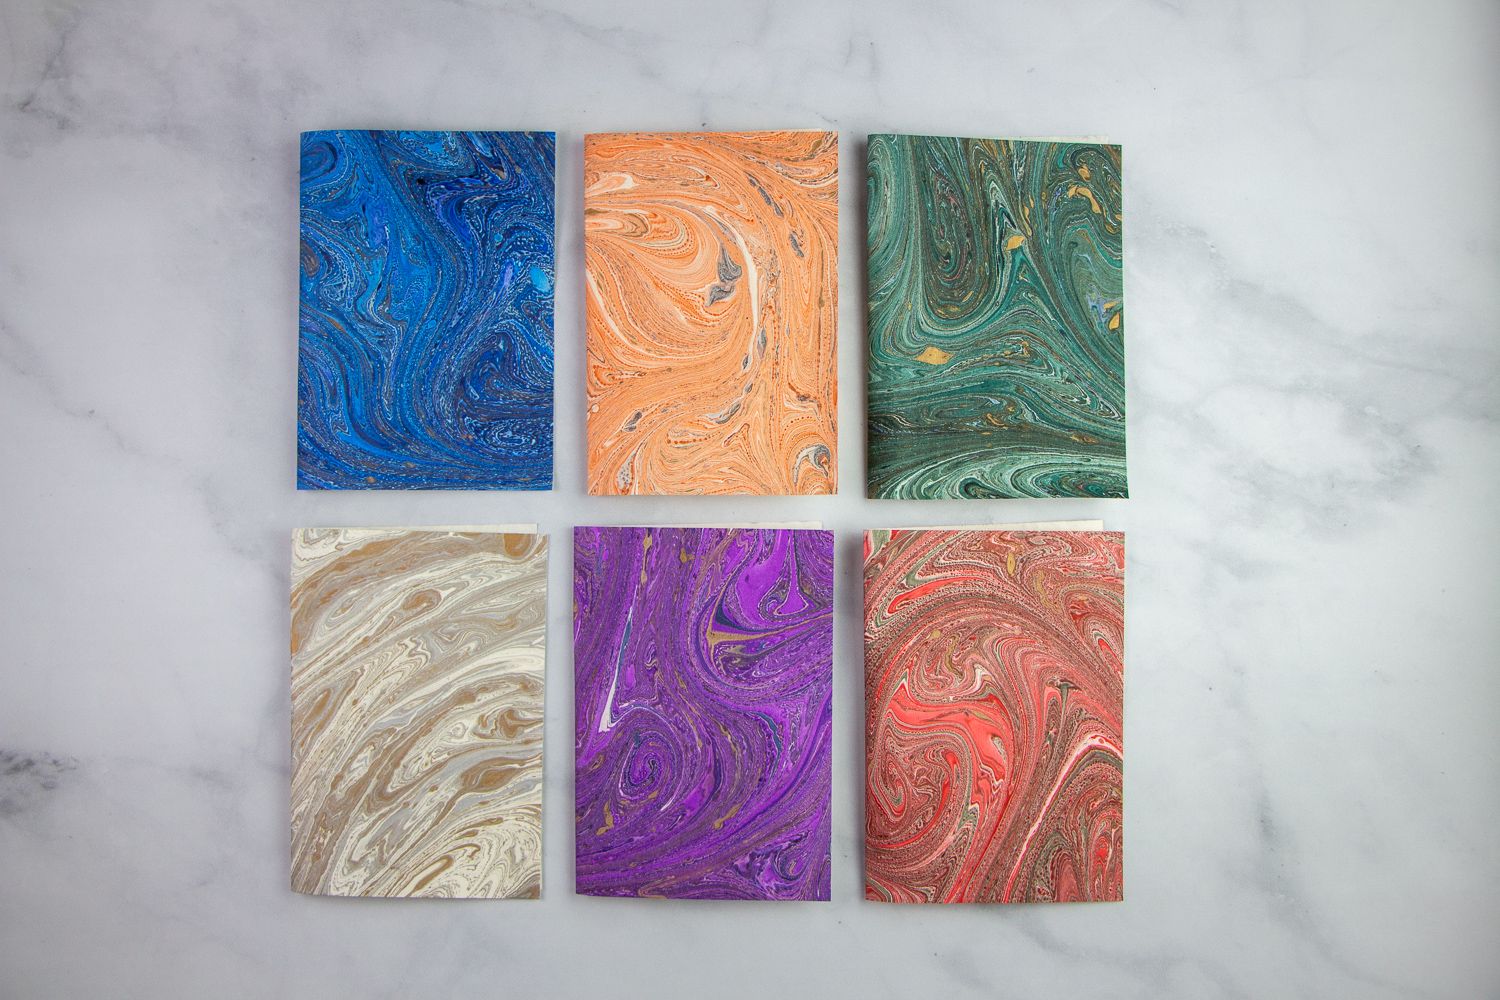 Italian marbled stationery from Florence